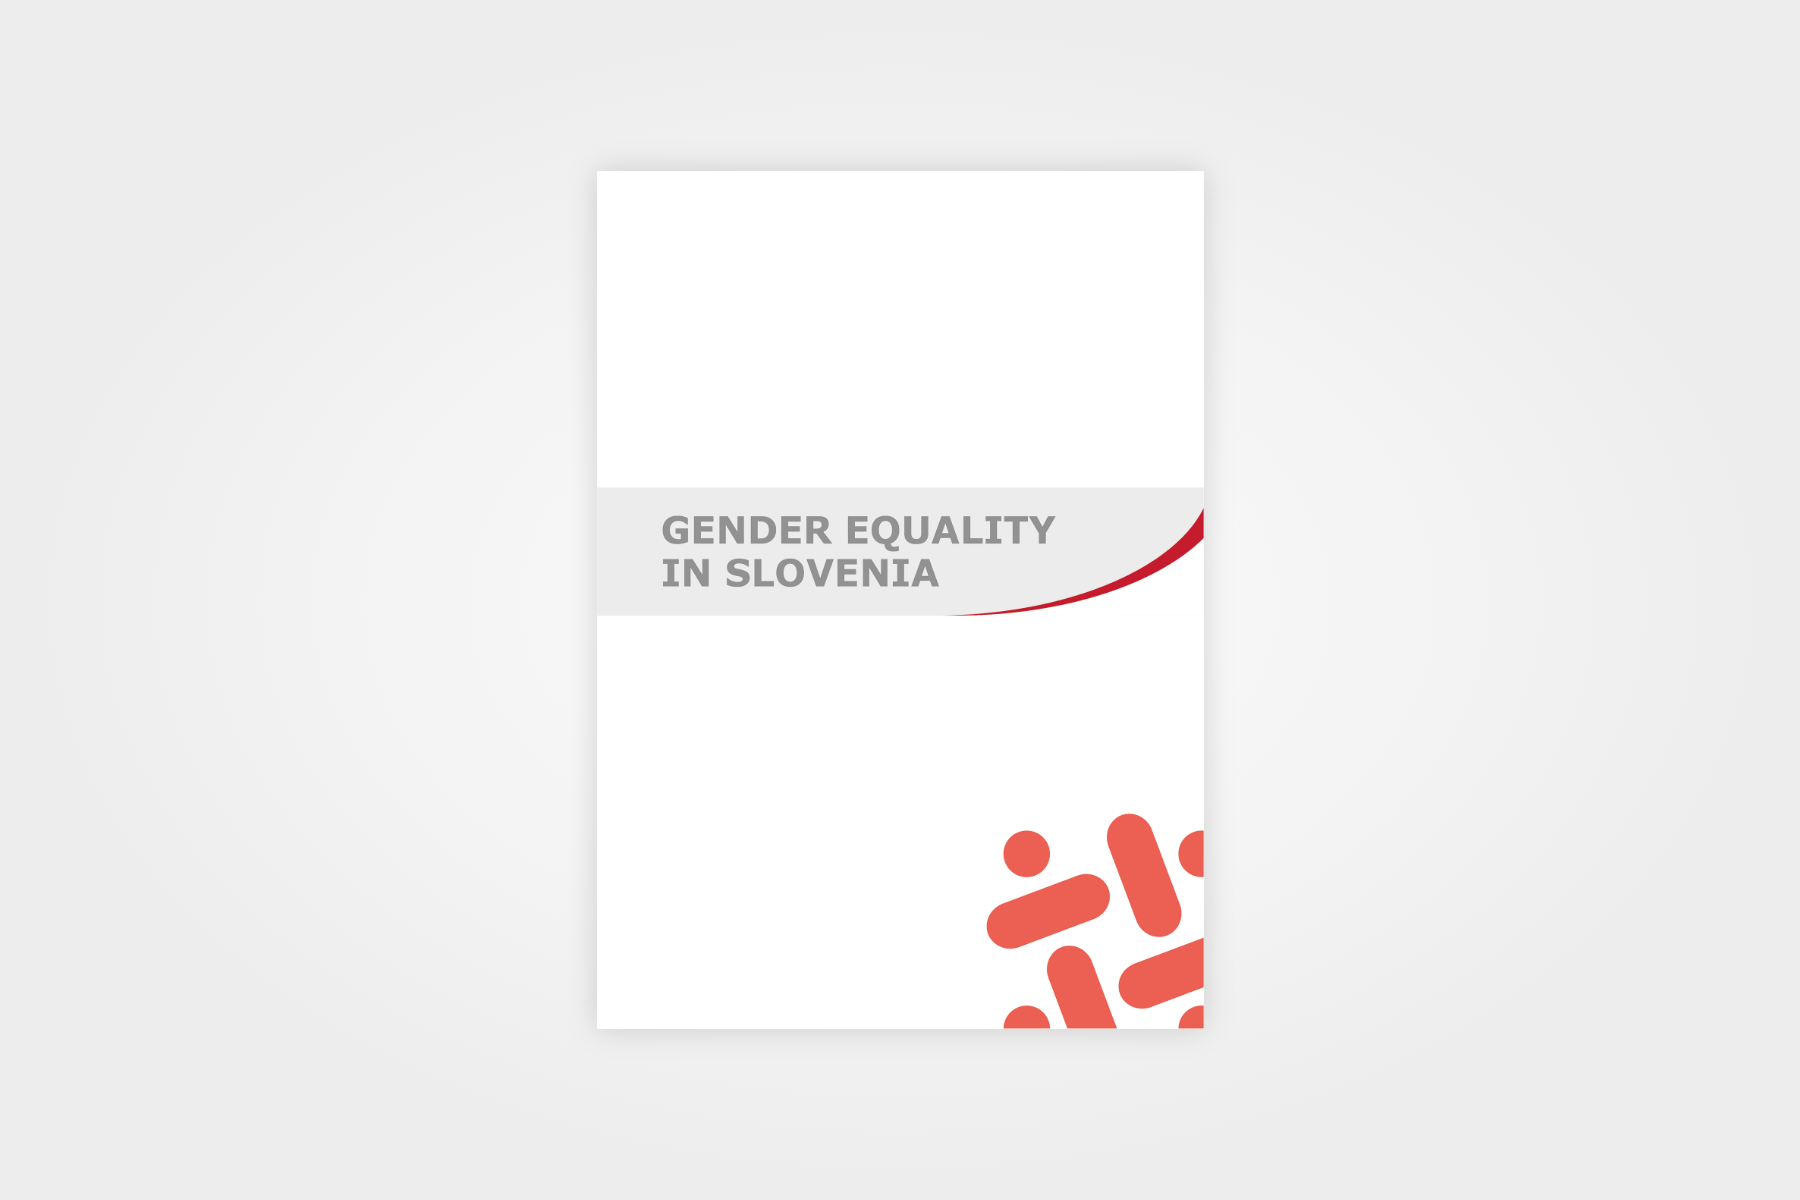 Gender Equality in Slovenia